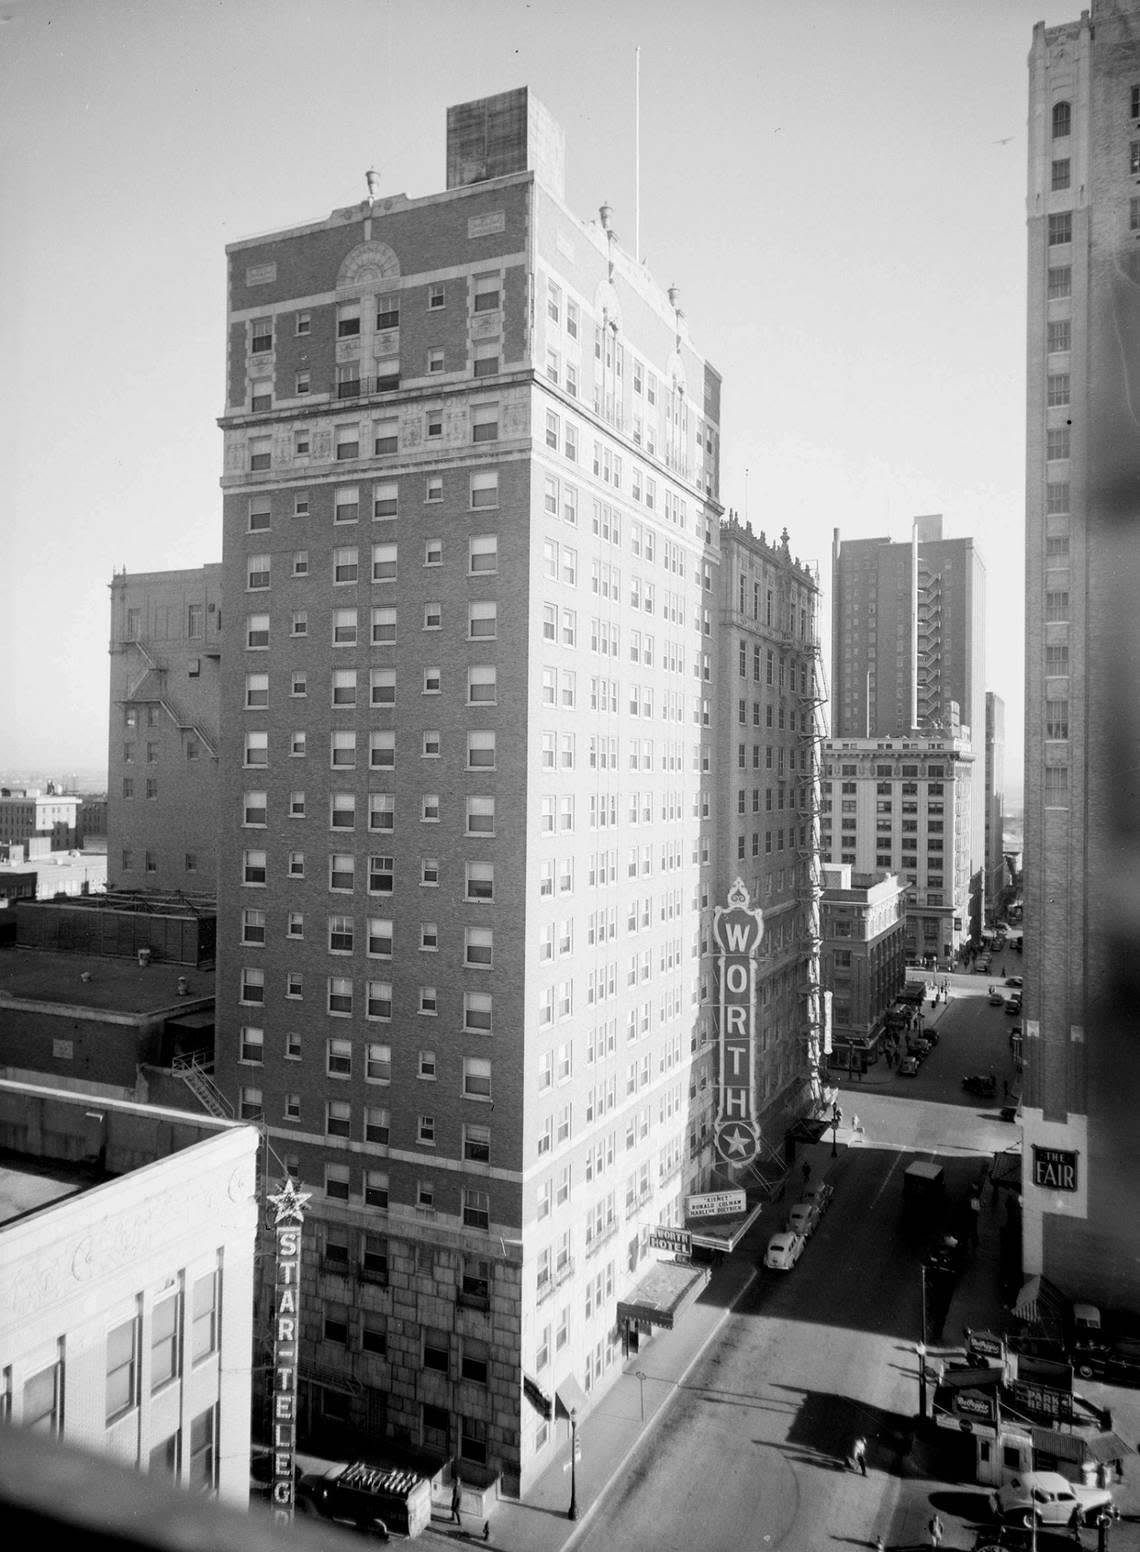 Dec. 20, 1944: The Worth Hotel. On the side of the building, there is a 100-pound of reinforced concrete cornice that fell from the top floor.